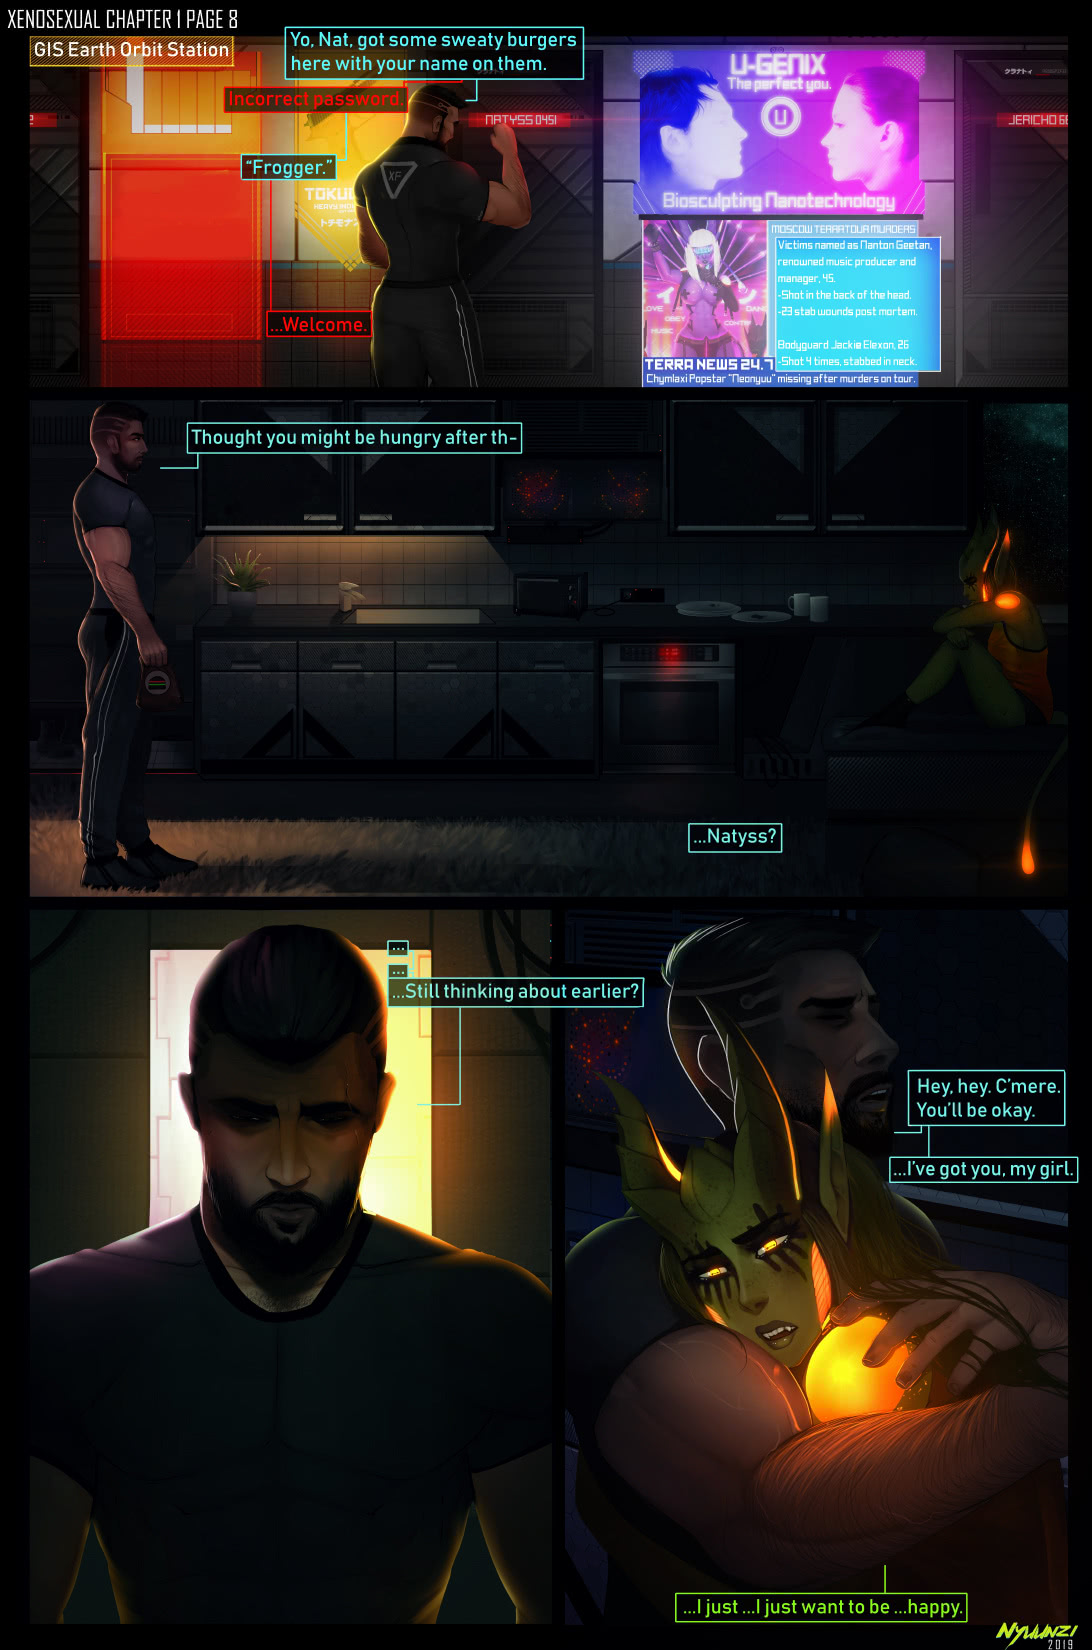 Xenosexual - Page 9